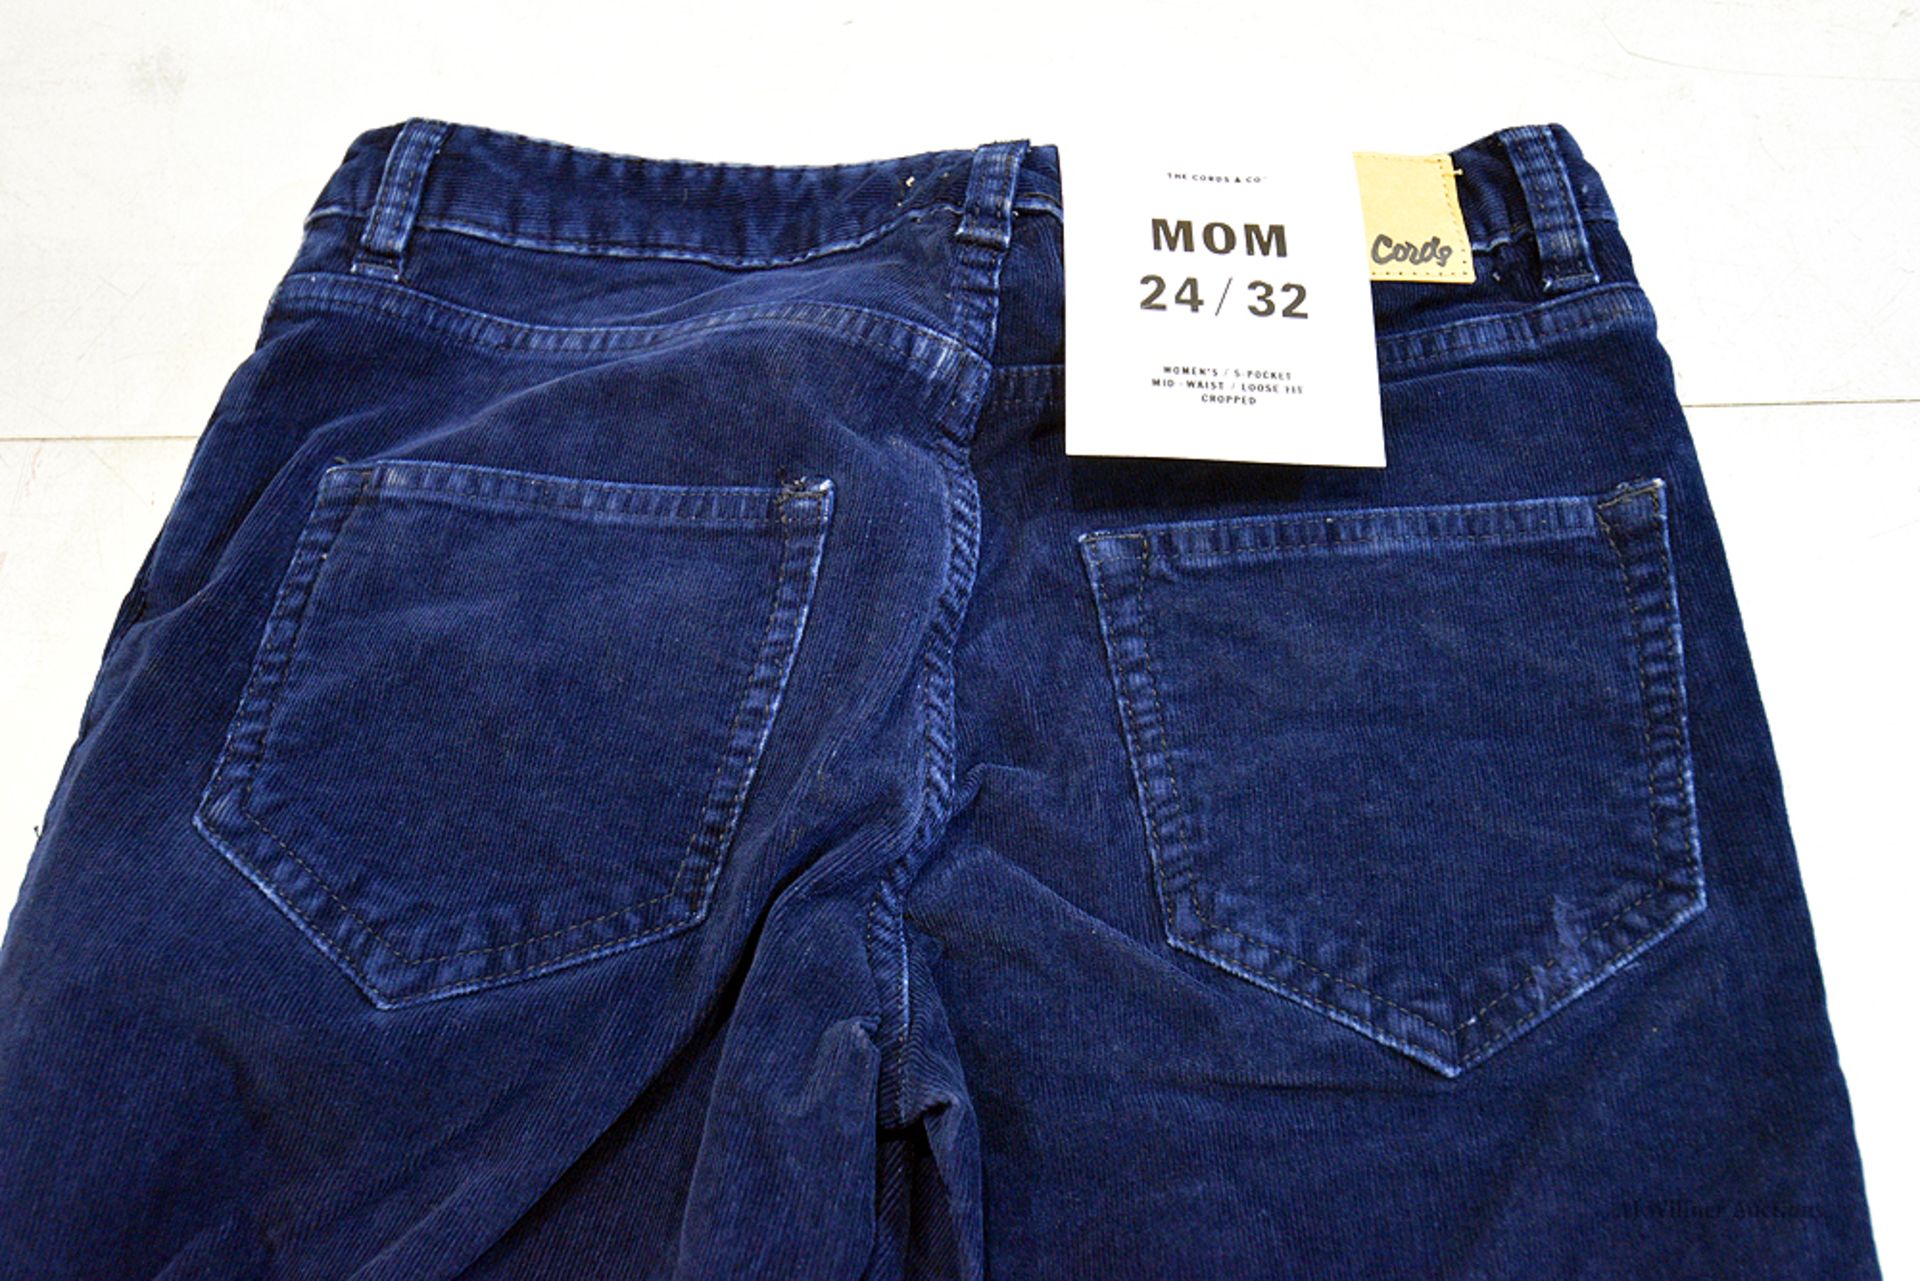 The Cords & Co. "Mom" Women's/ Mid-Waist/ Loose Fit/ Chopped Pants MSRP $160 - Image 3 of 5